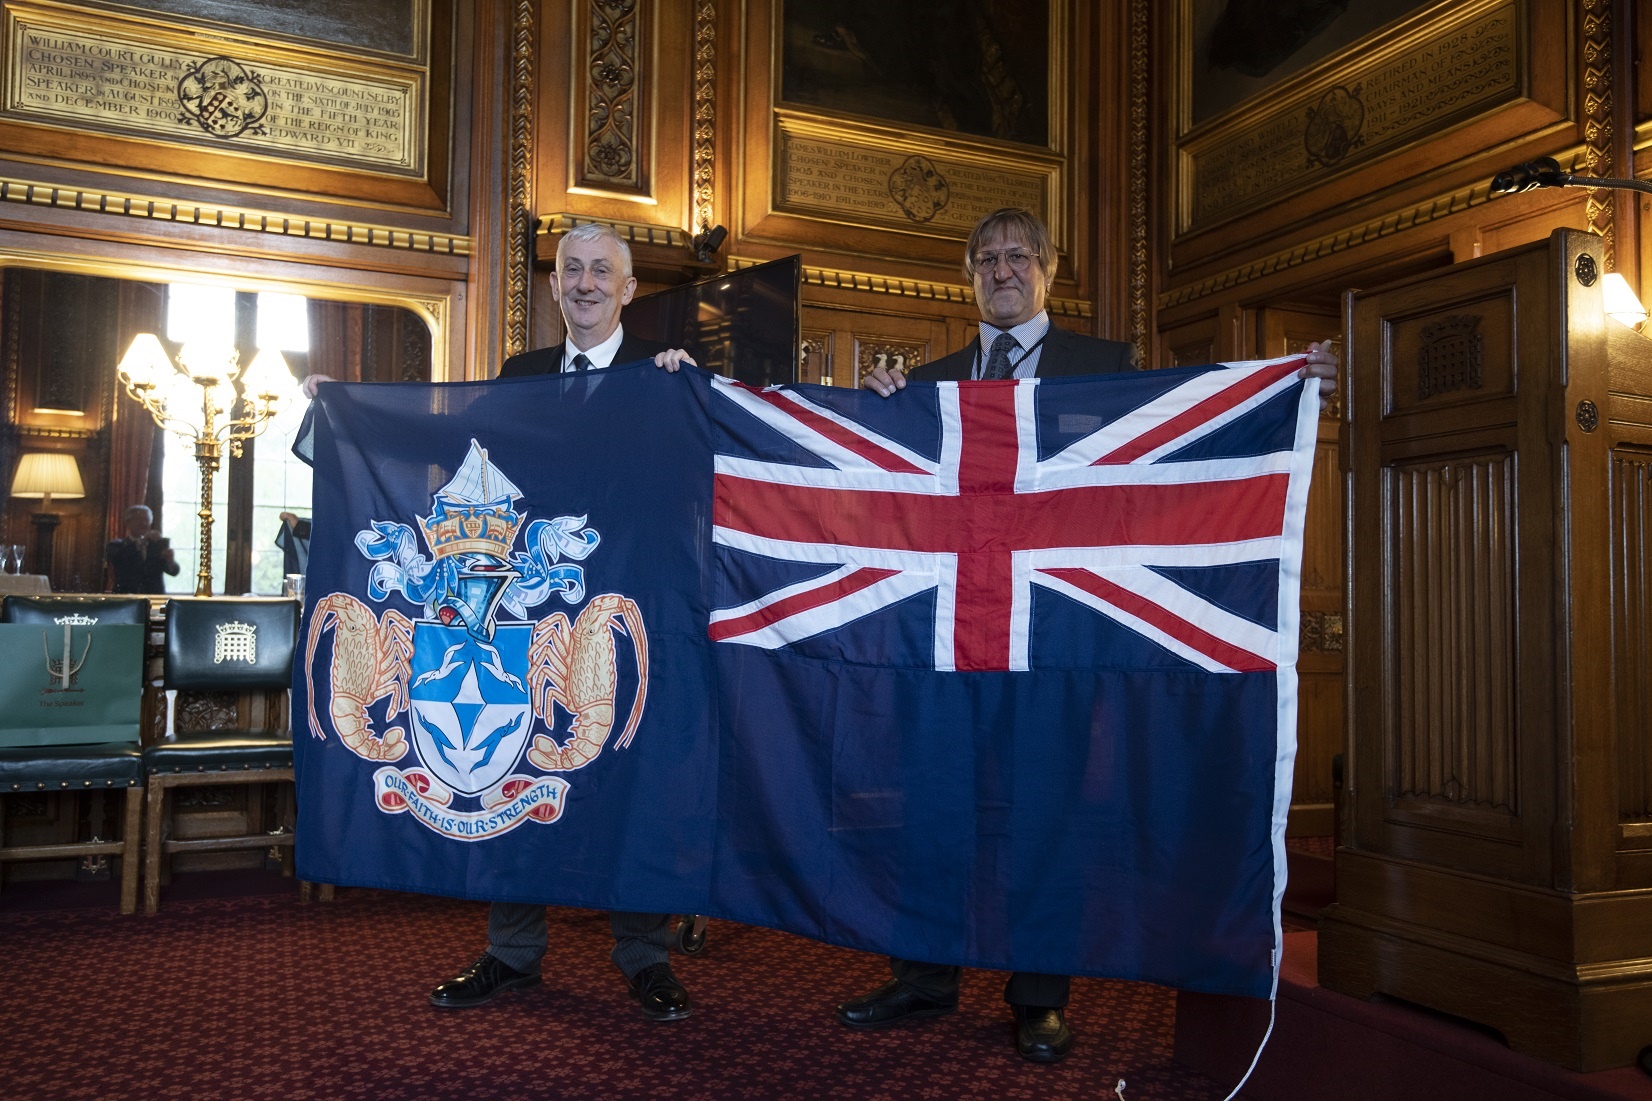 James Glass and Speaker holding up the Tristan flag